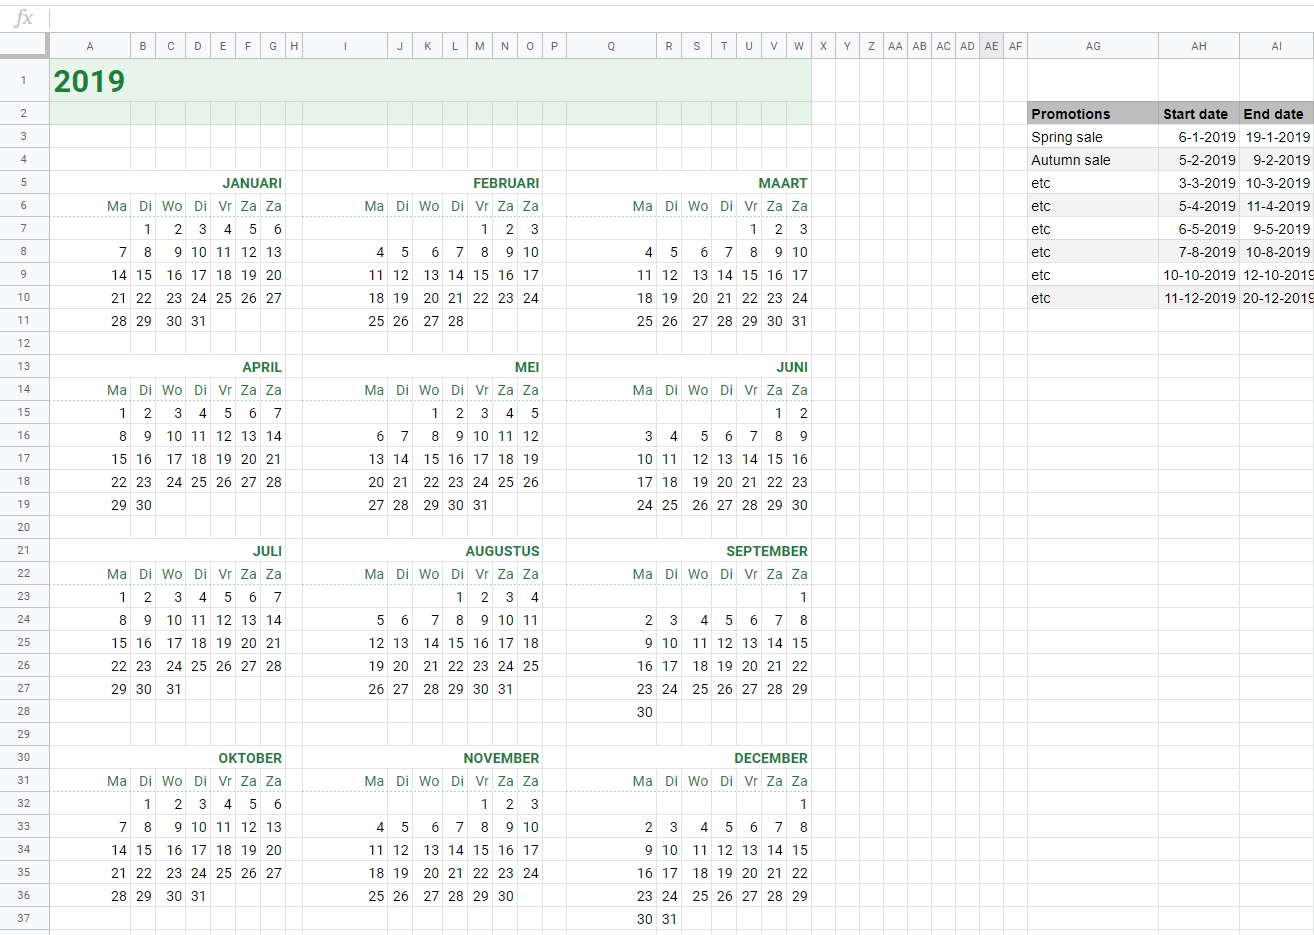 How Can I Highlight Dates In A Calendar View That Are